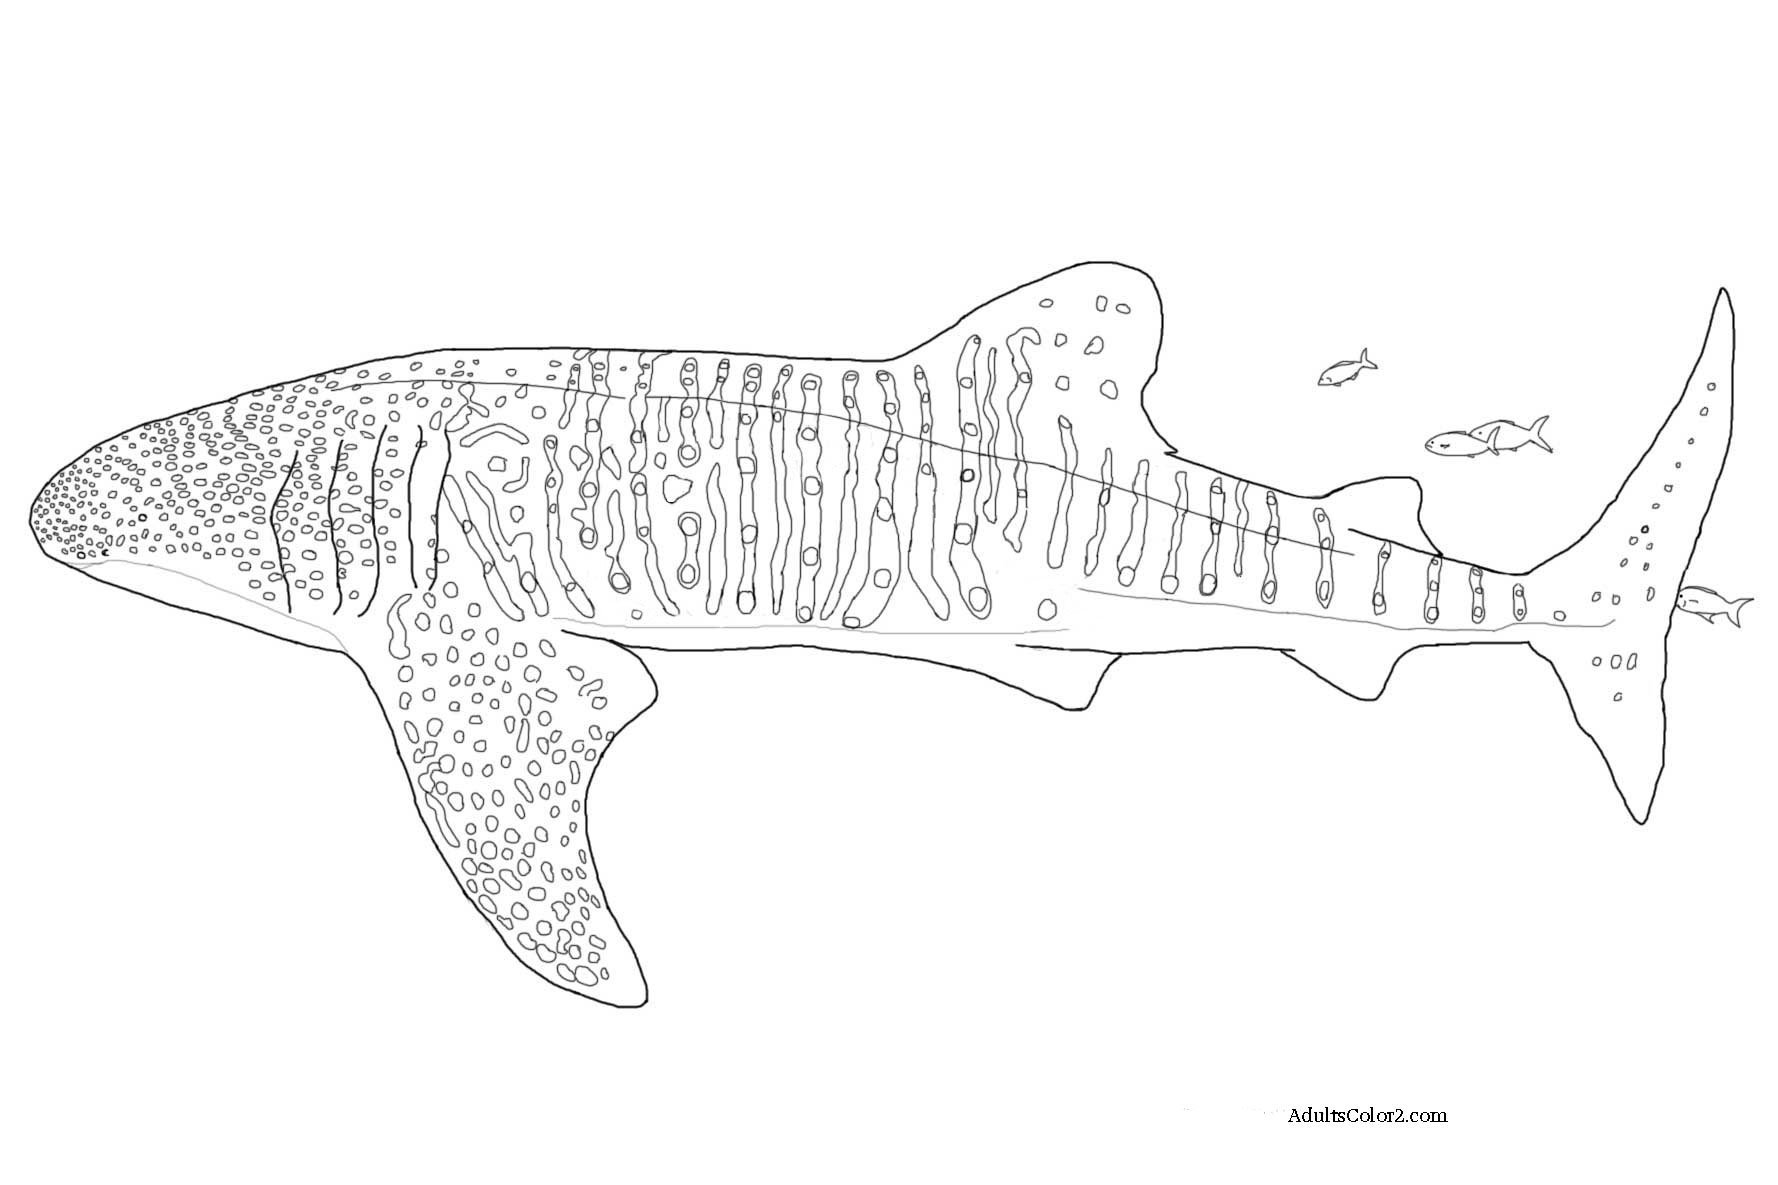 Whale Shark coloring #12, Download drawings